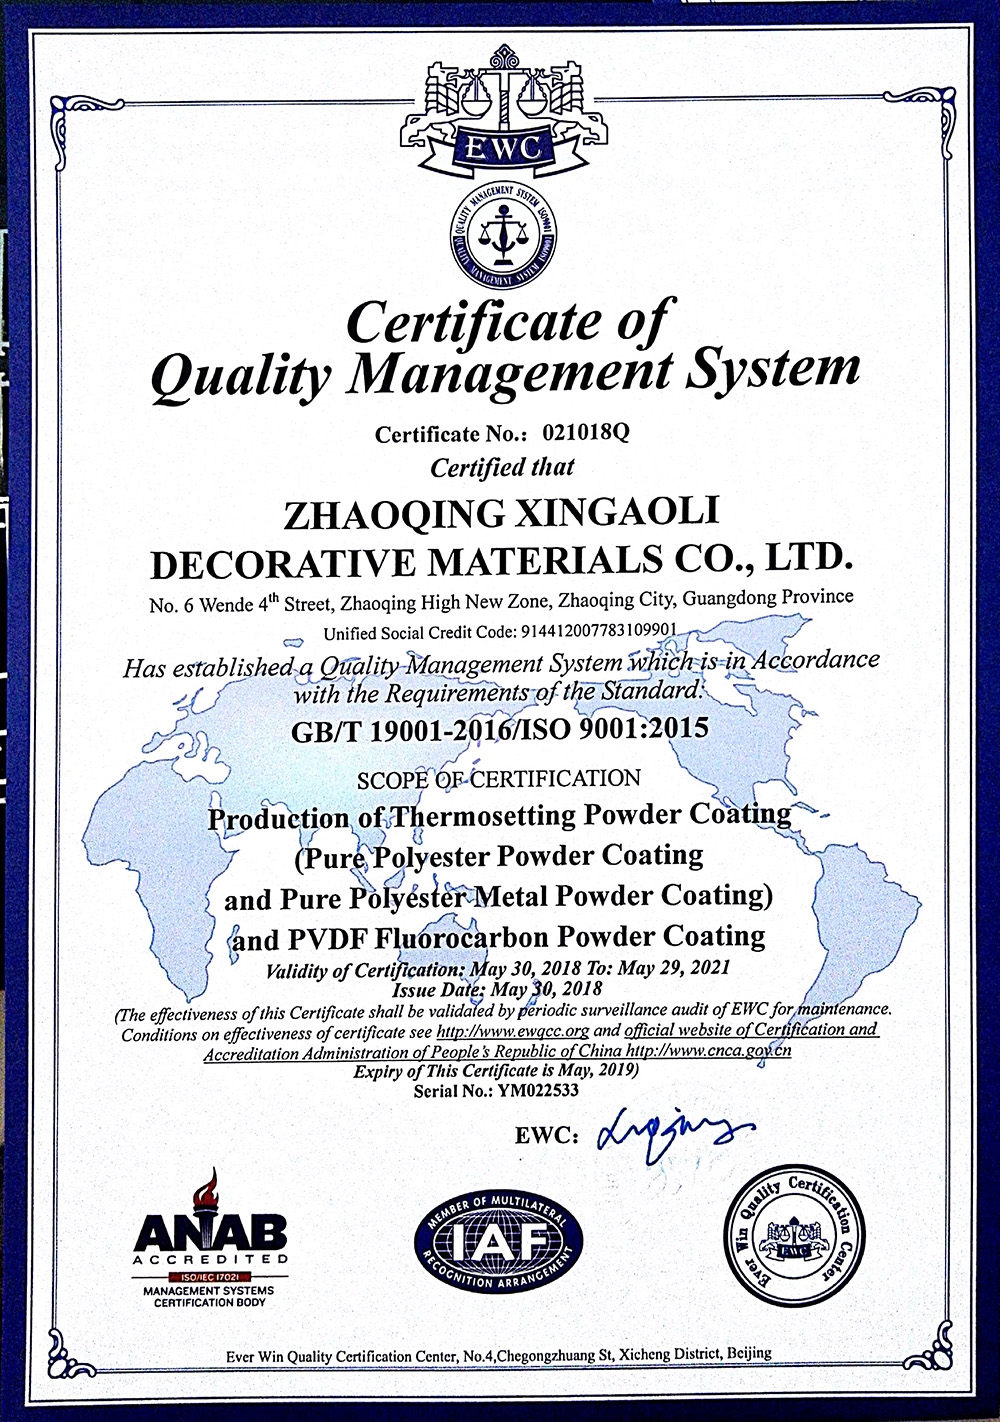 Zhaoqing KGE - Quality Management System Certification (18-21)